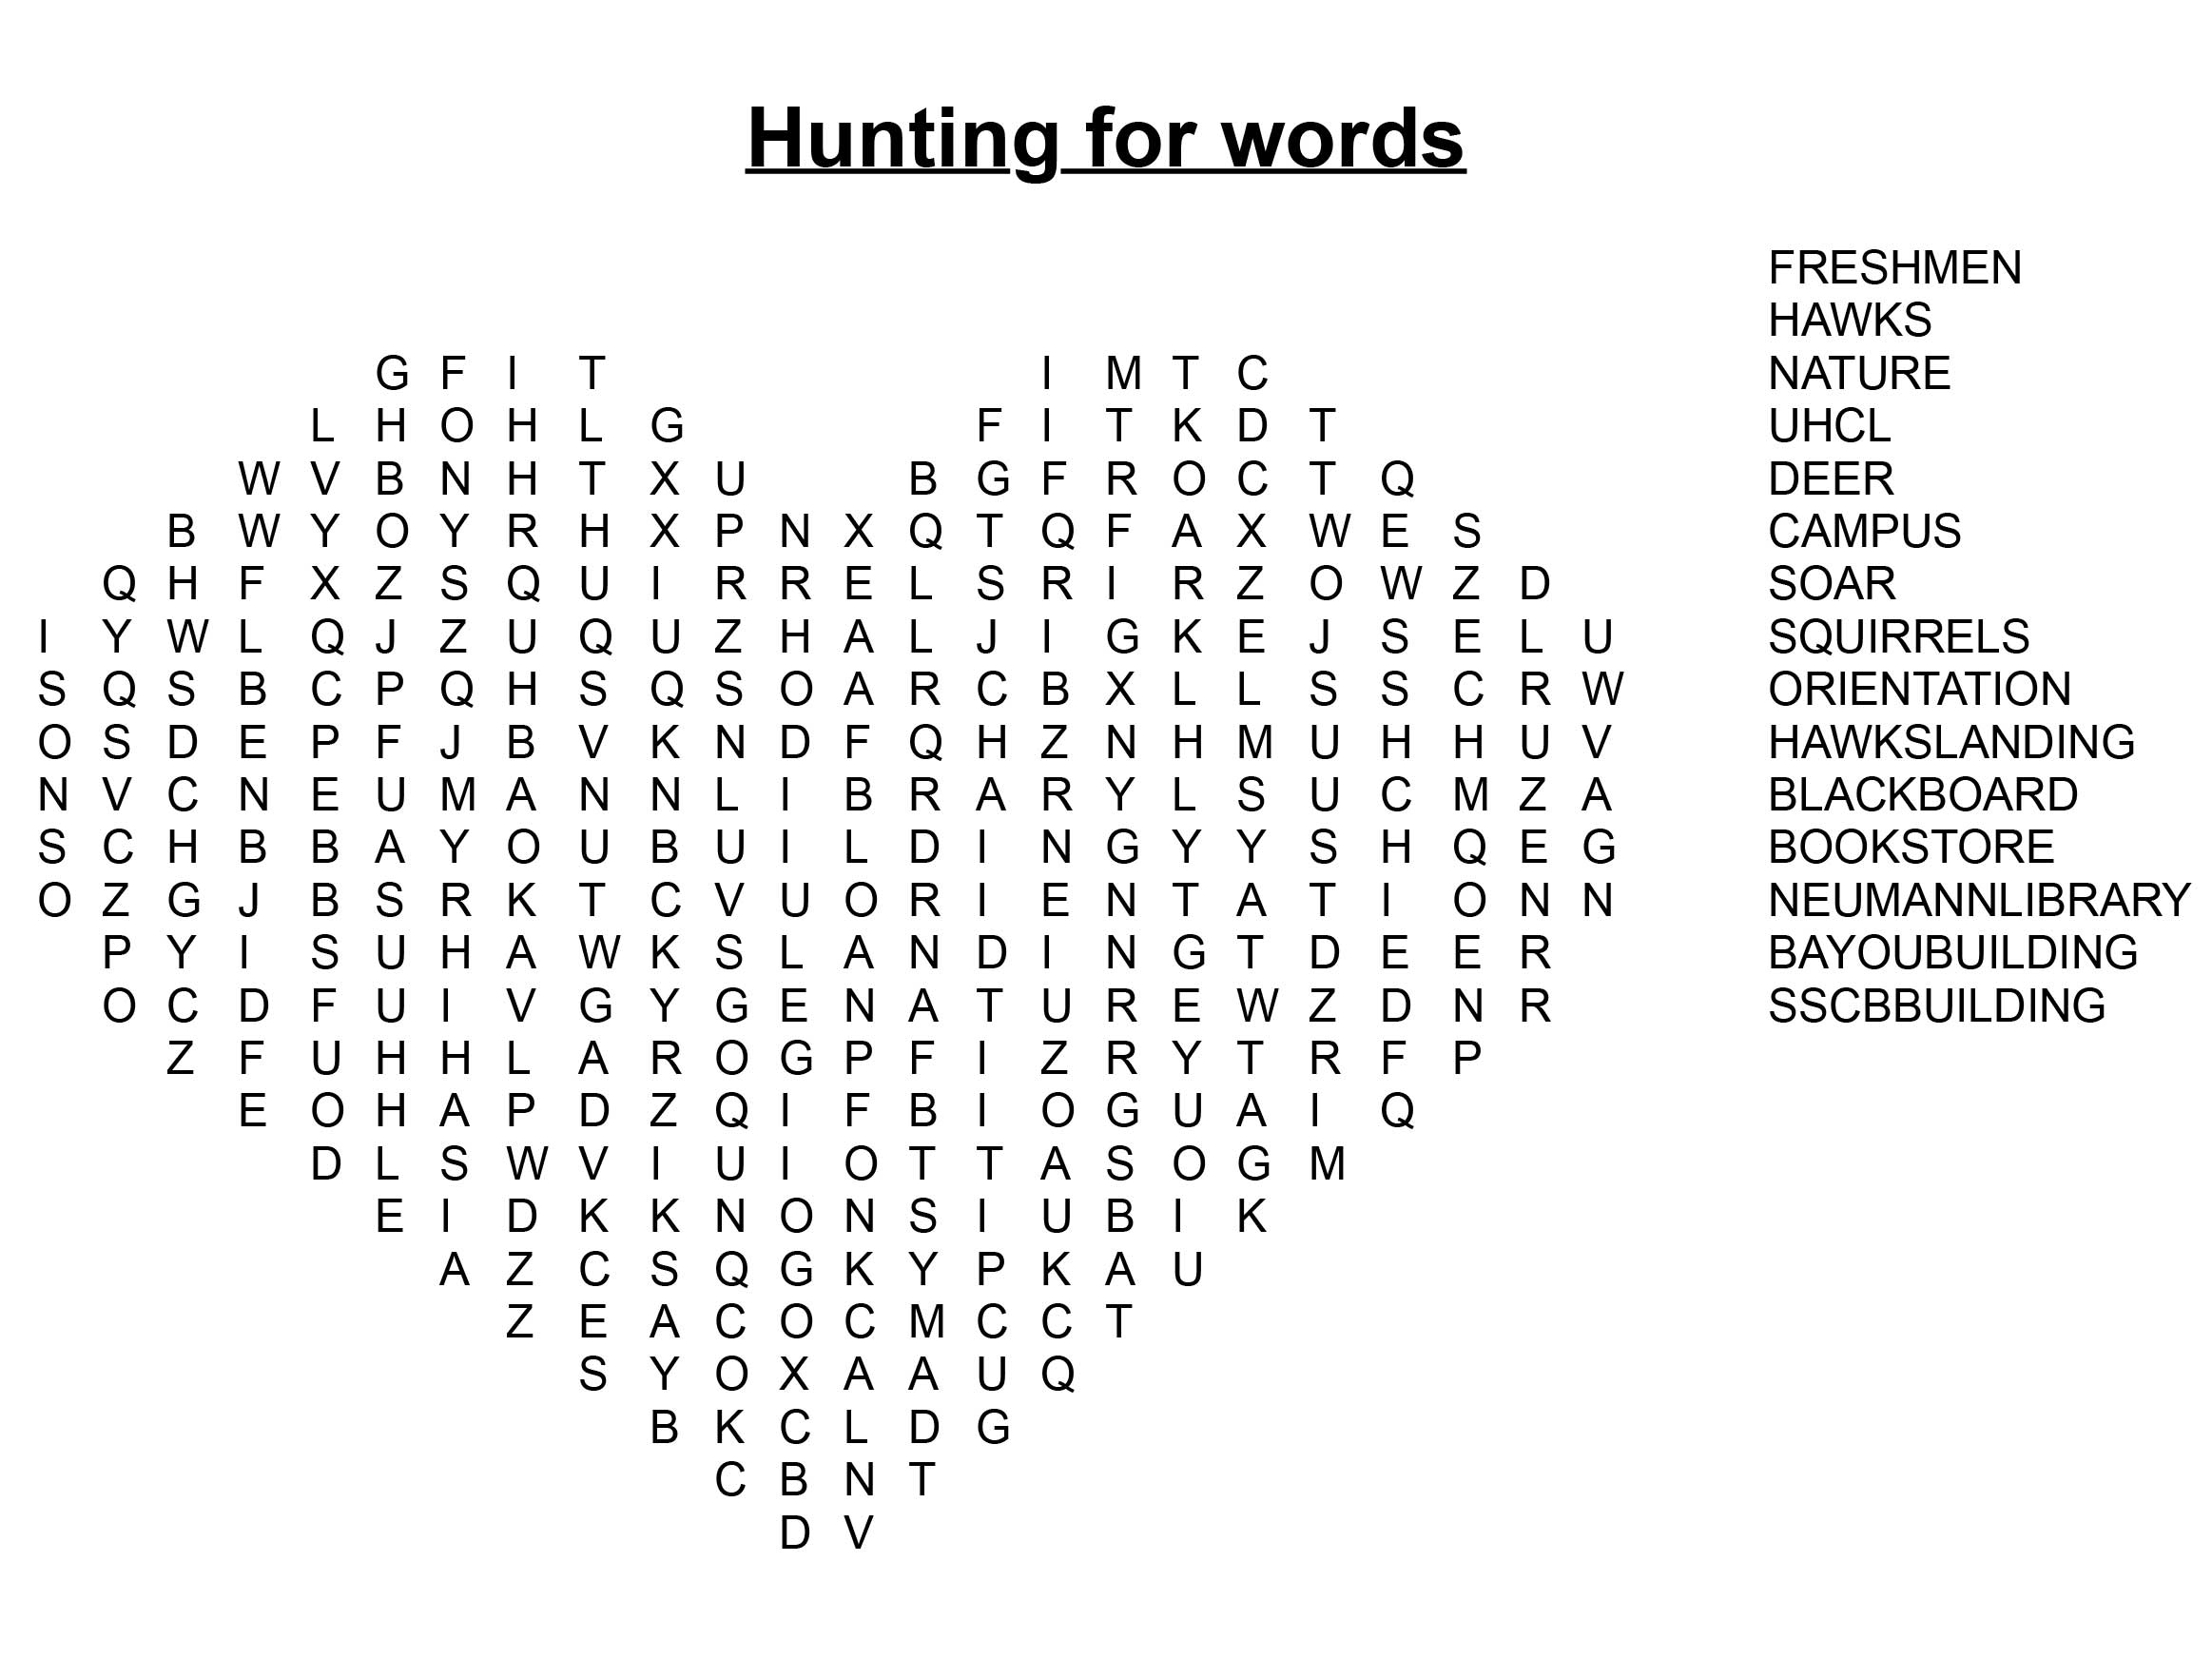 GRAPHIC: Hunt for words in our UHCL themed word search. Word search by The Signal staff.